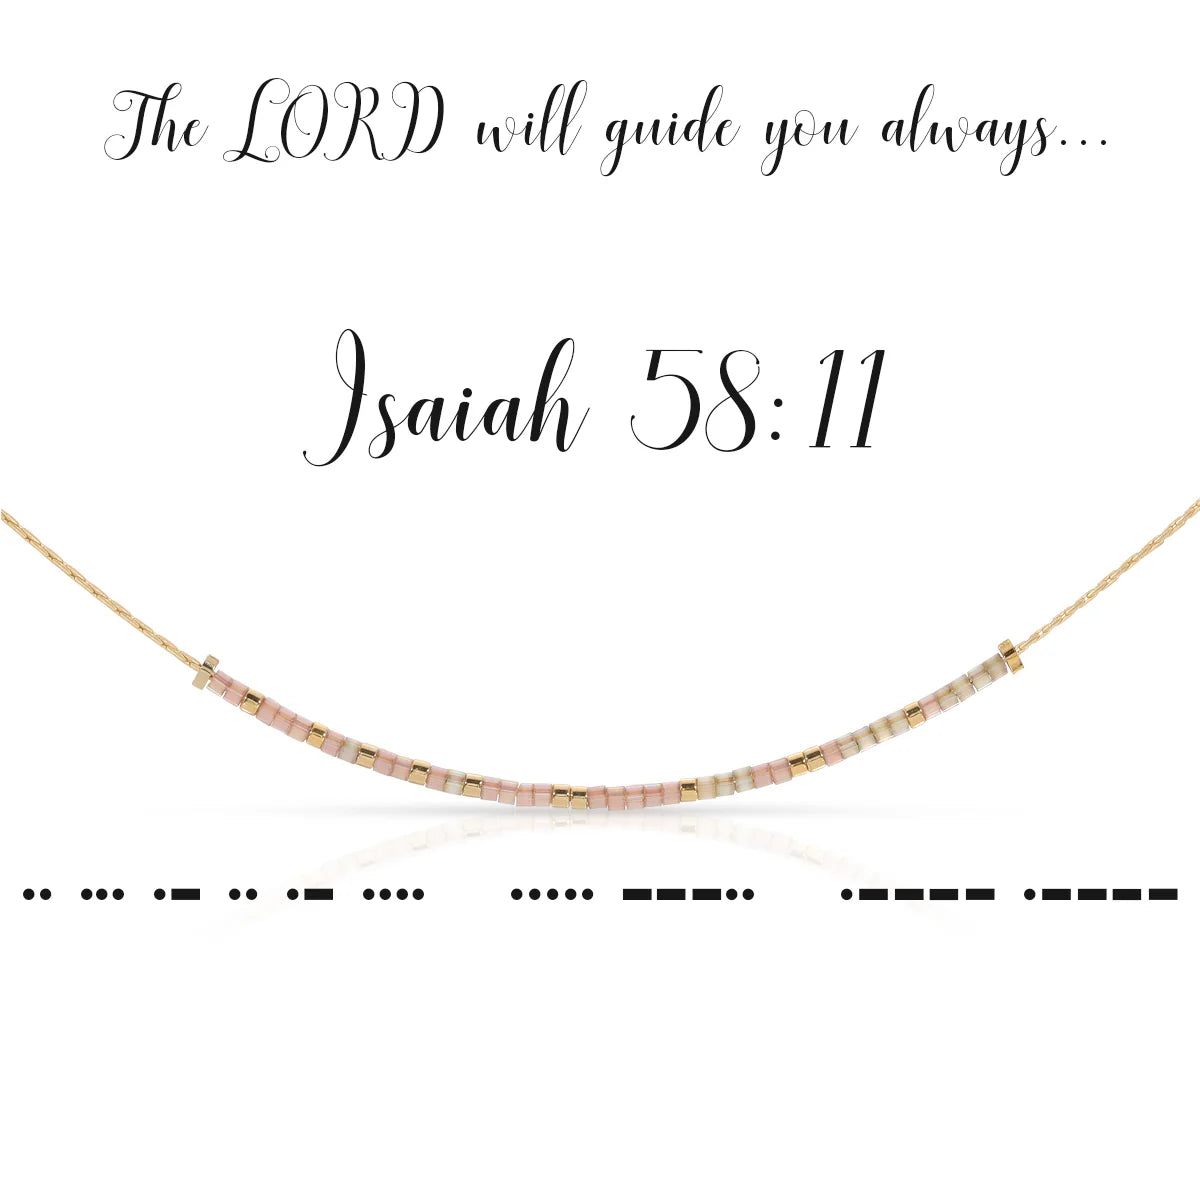 Isaiah 58:11 Necklaces